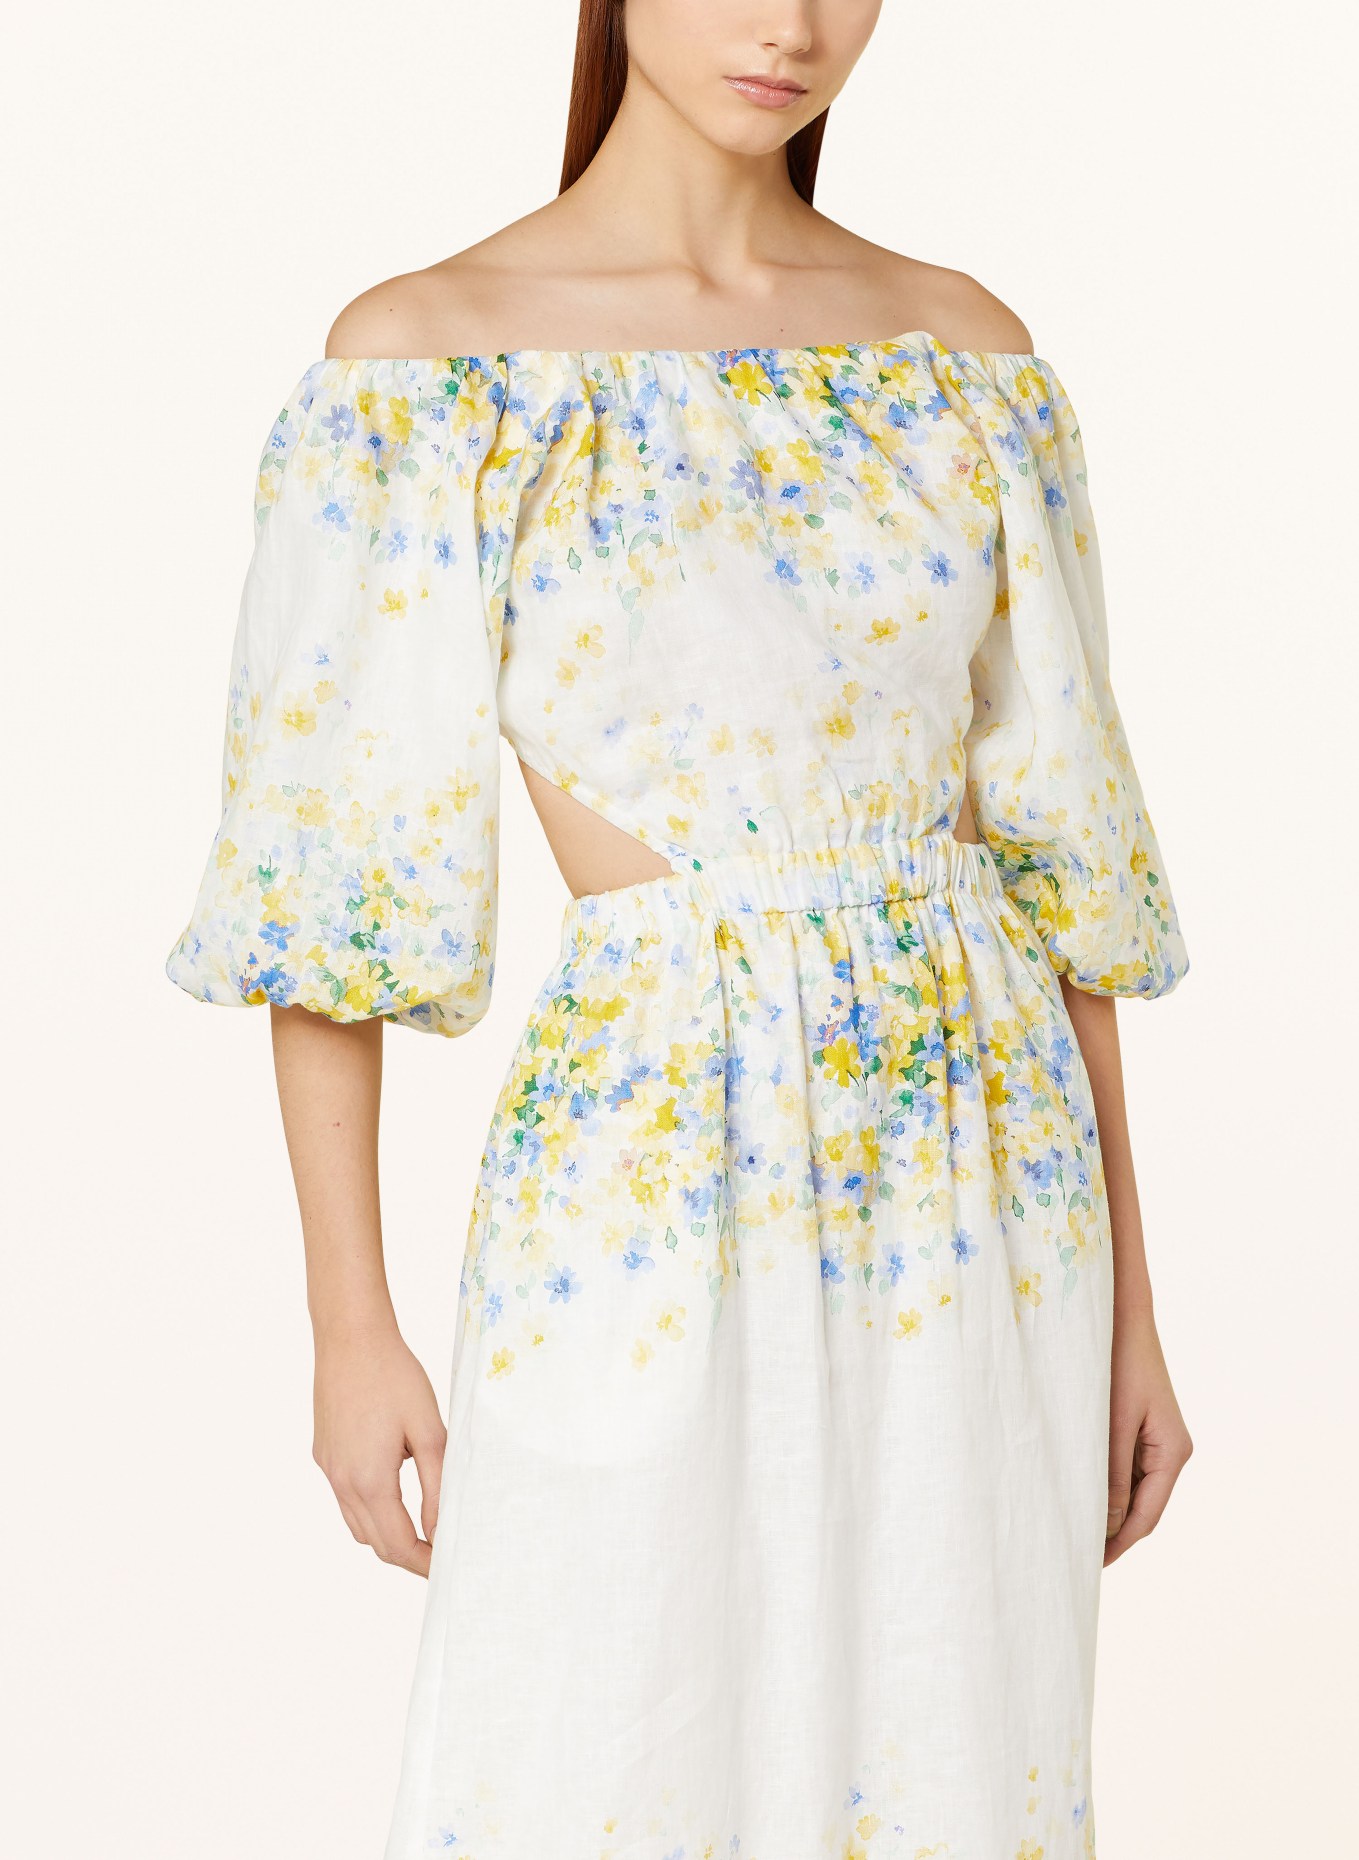 MRS & HUGS Linen dress with cut-out, Color: WHITE/ YELLOW/ BLUE (Image 4)